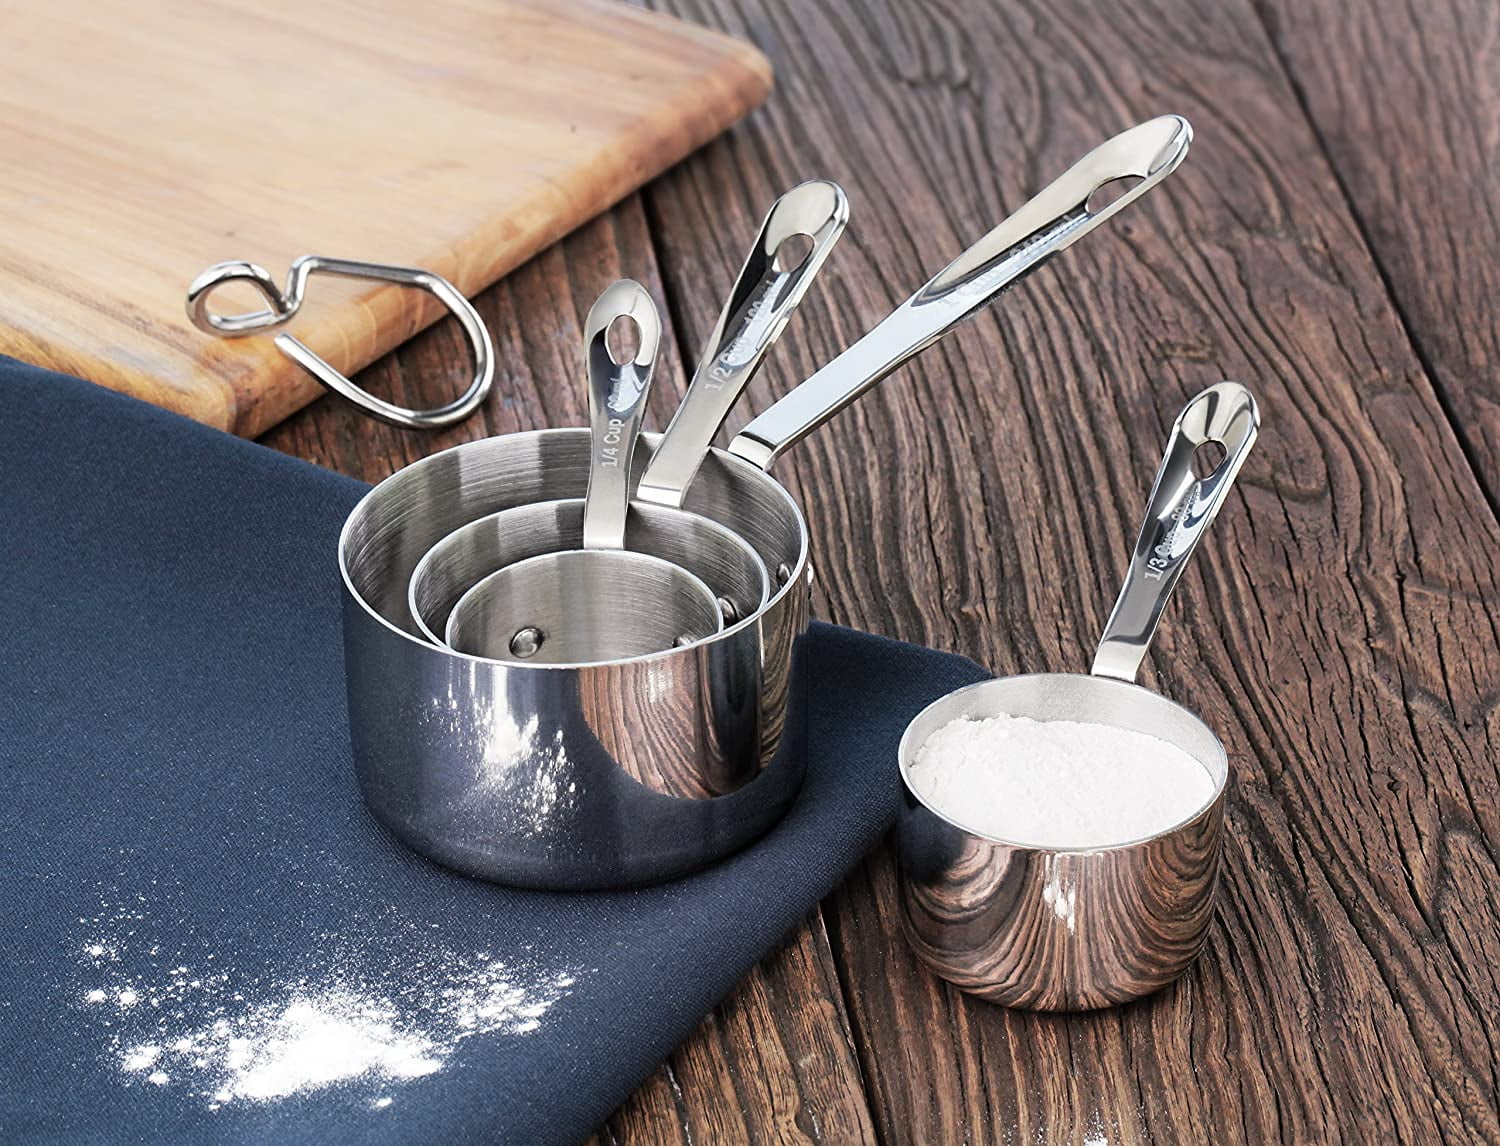 All-Clad Stainless Steel Measuring Cups 